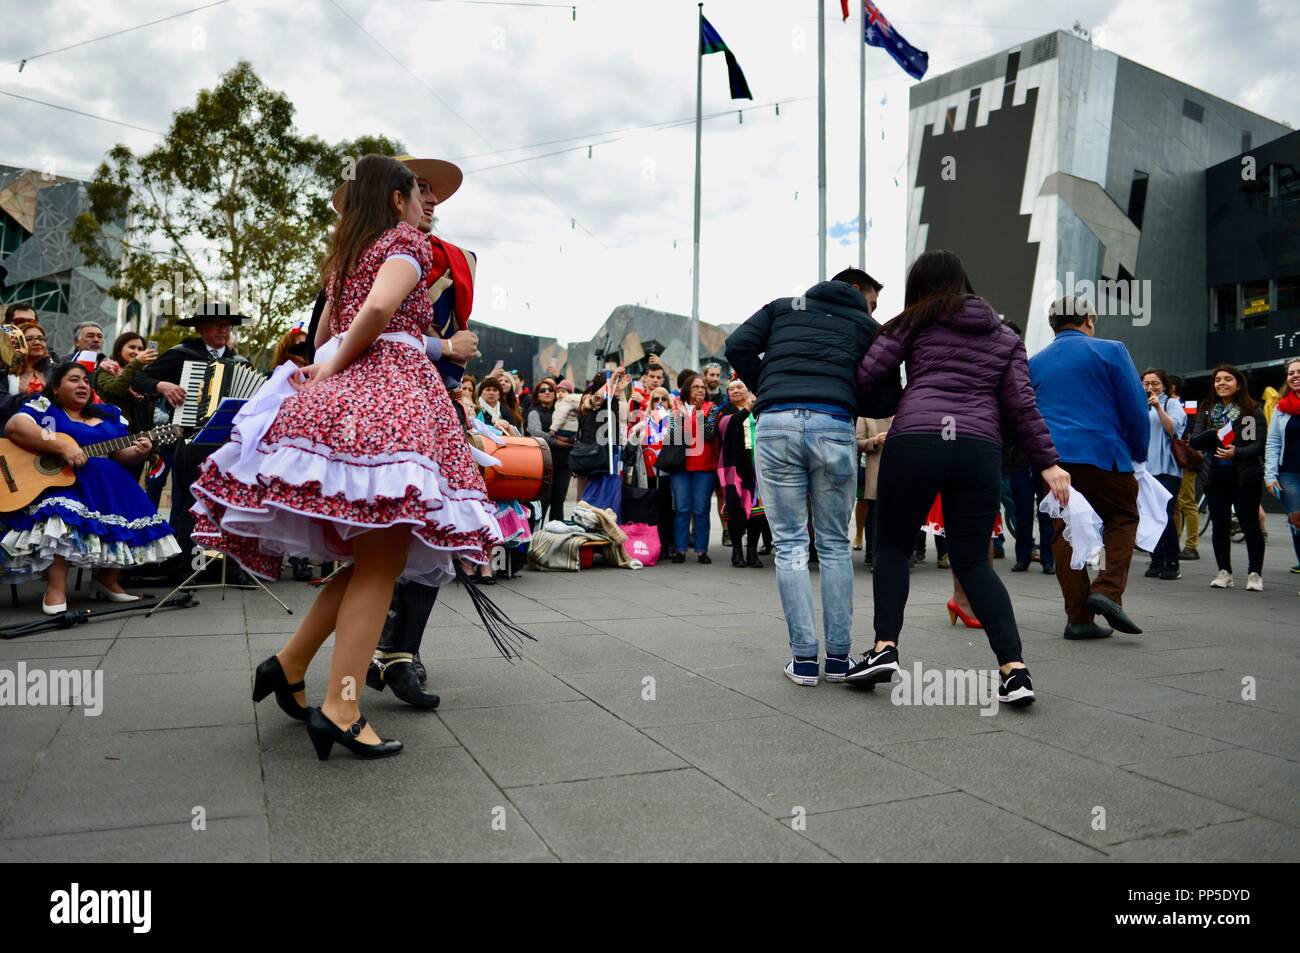 Fiestas Patrias, the native land holidays, the Chilean national day celebration at Federation square in Melbourne VIC, Australia, september 18th 2018 Stock Photo